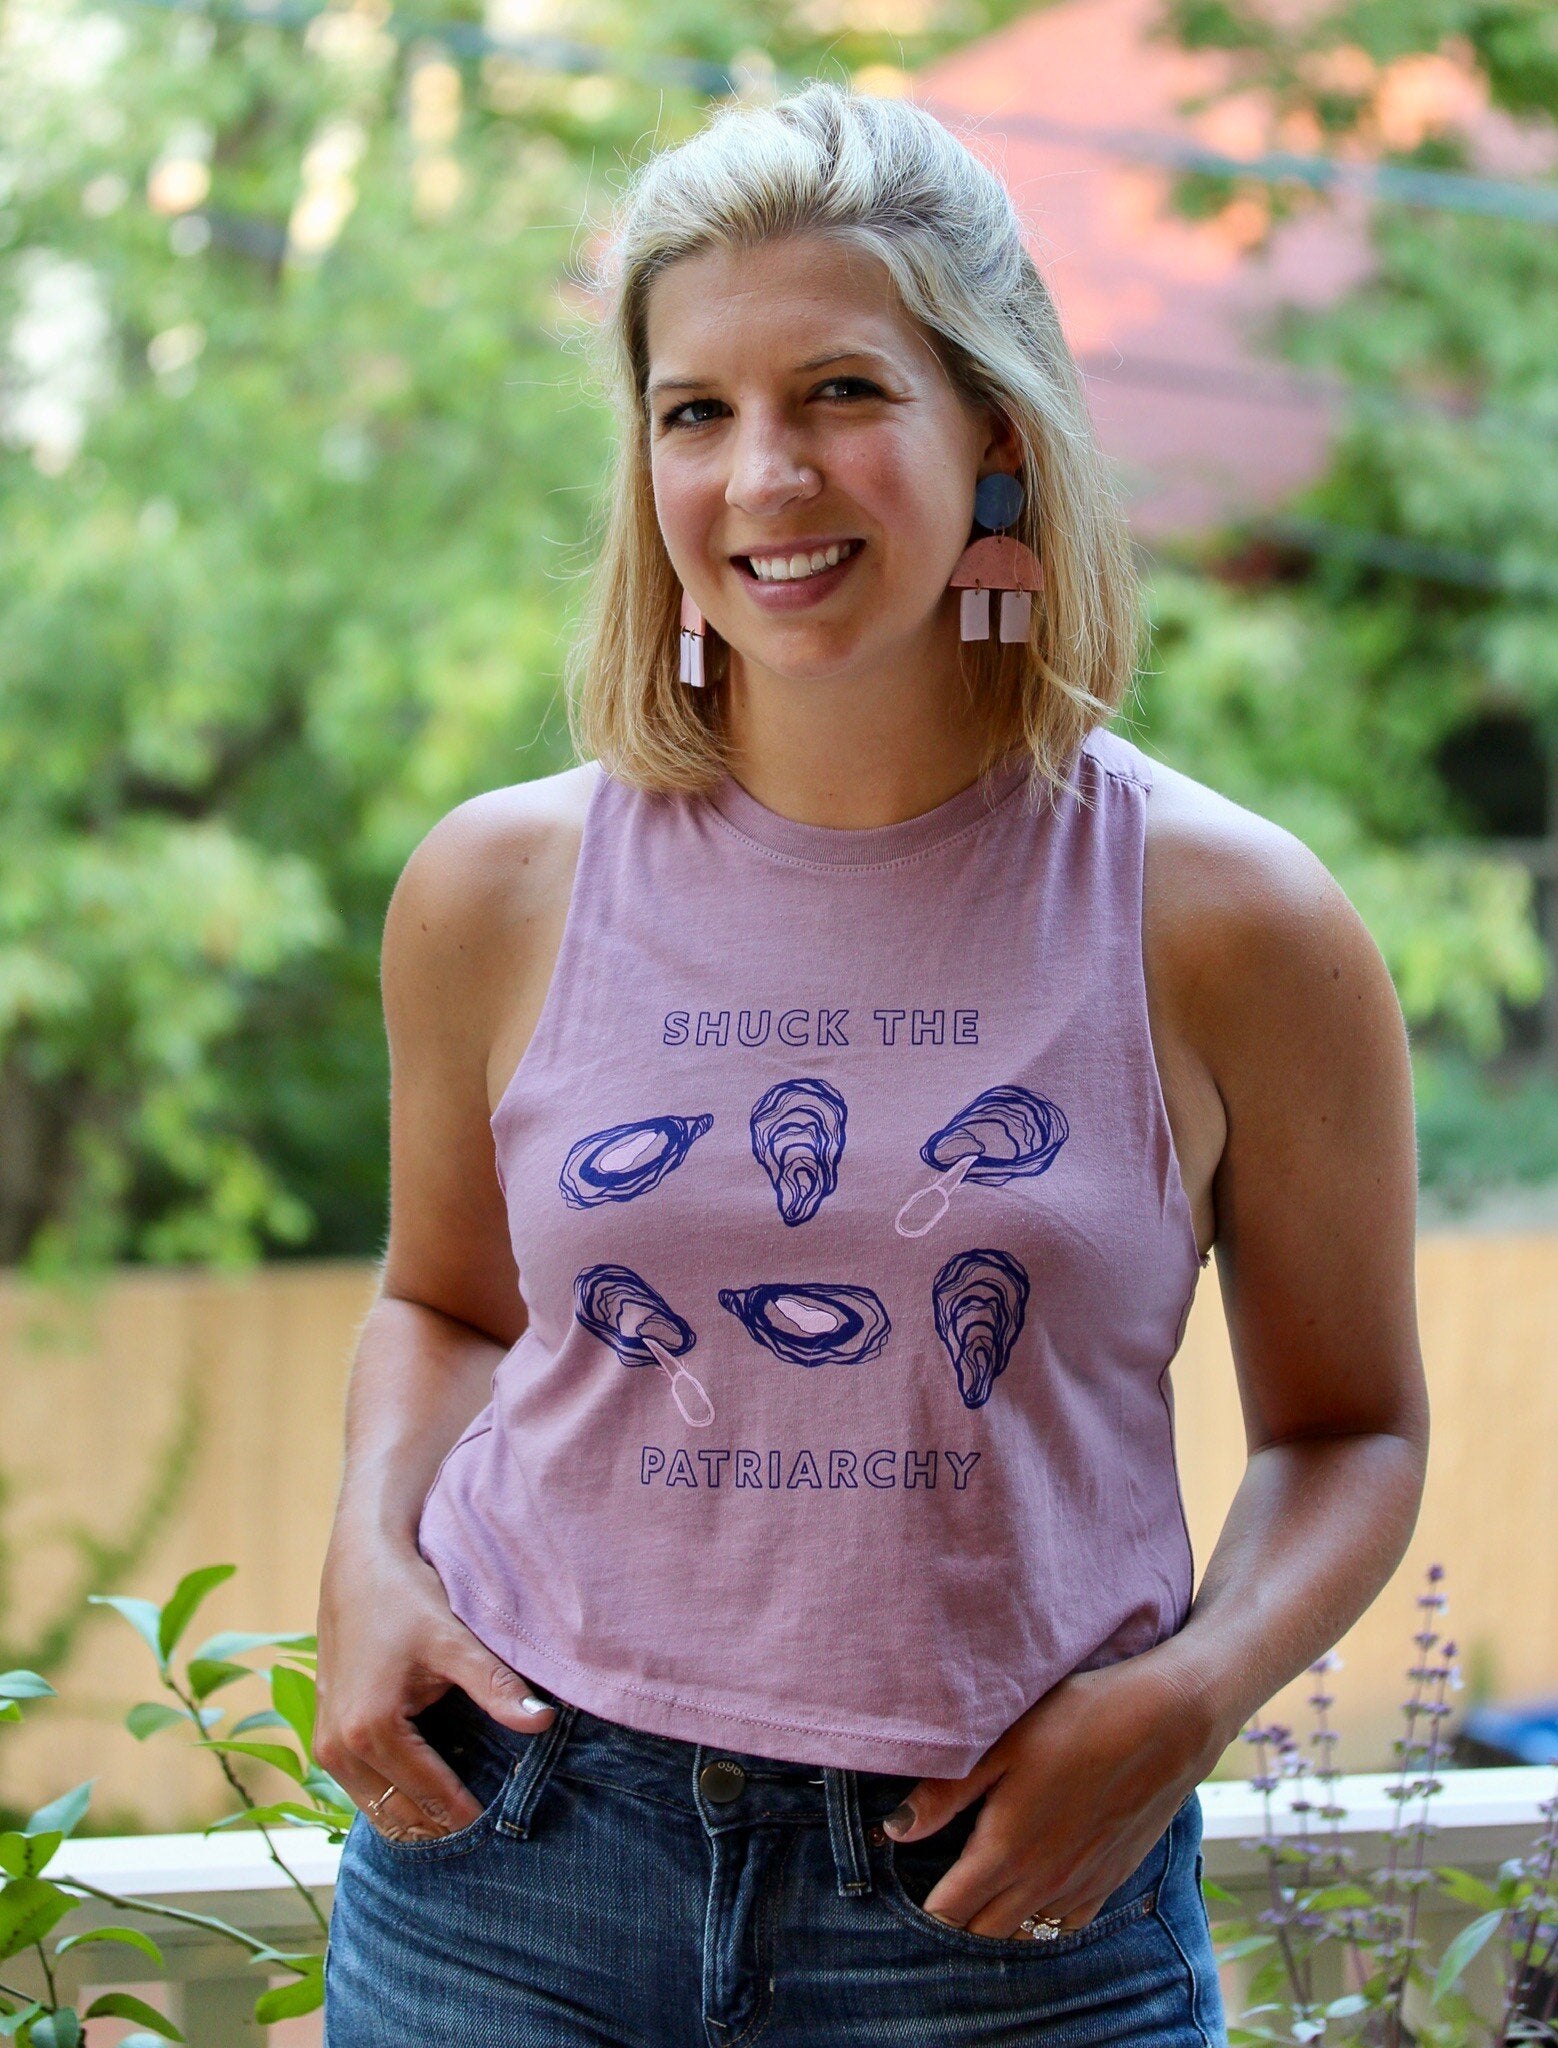 A woman wears a "Shuck the Patriarchy" cropped tank with jeans